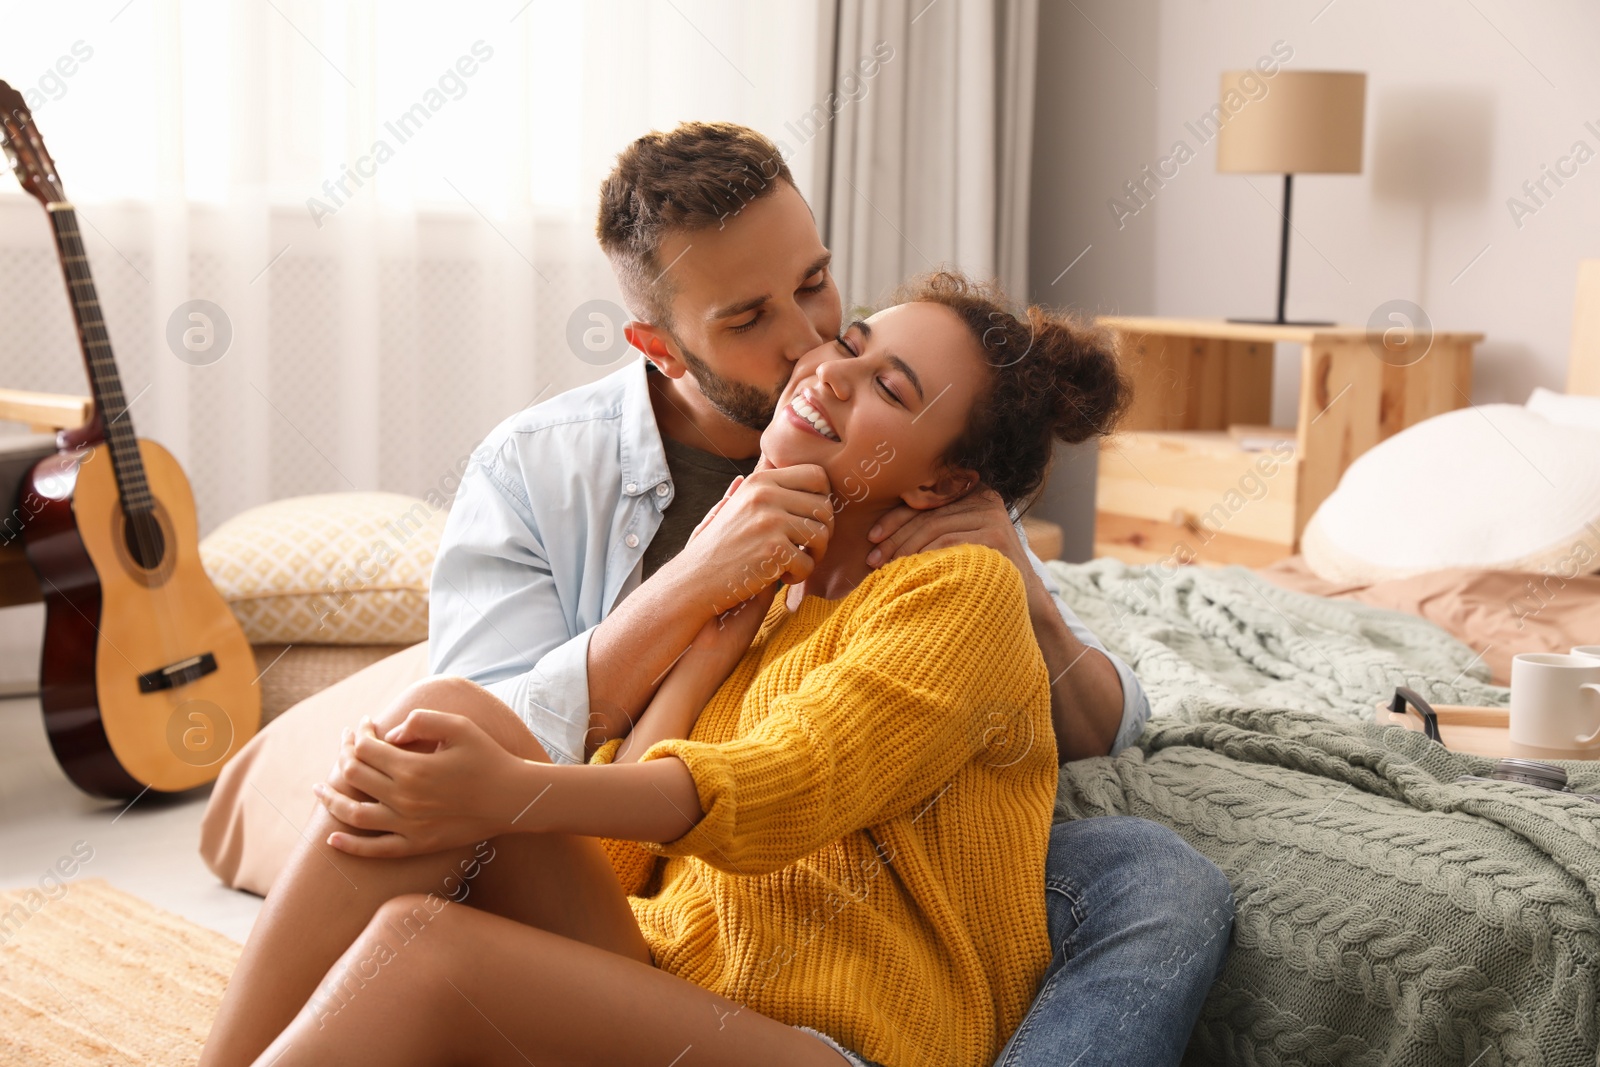 Photo of Lovely couple enjoying time together on floor in bedroom